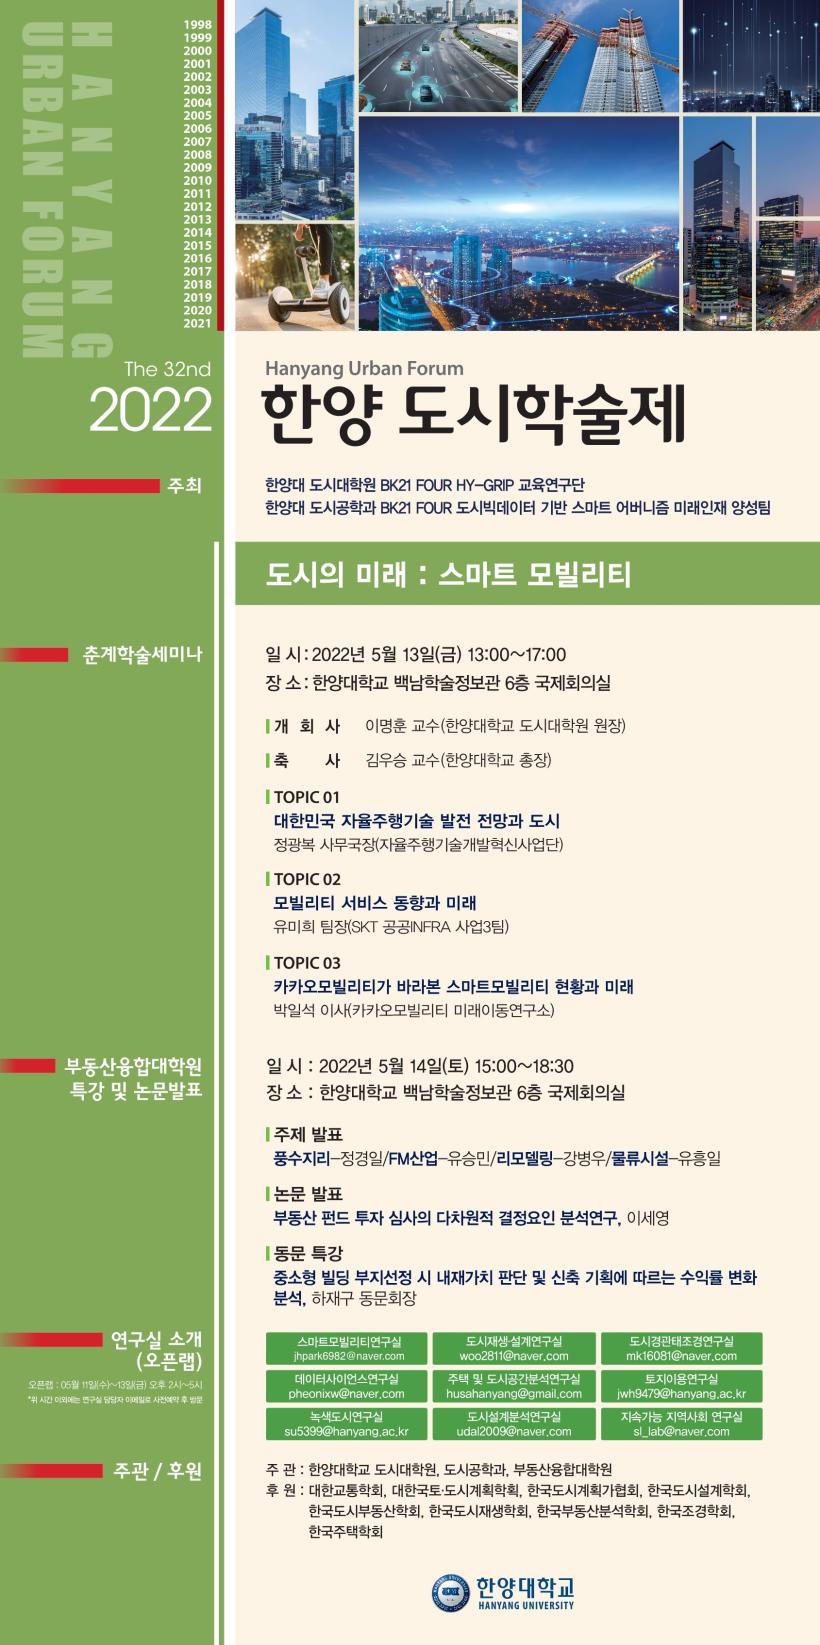 You are currently viewing [한양대학교] 2022 한양 도시학술제 개최